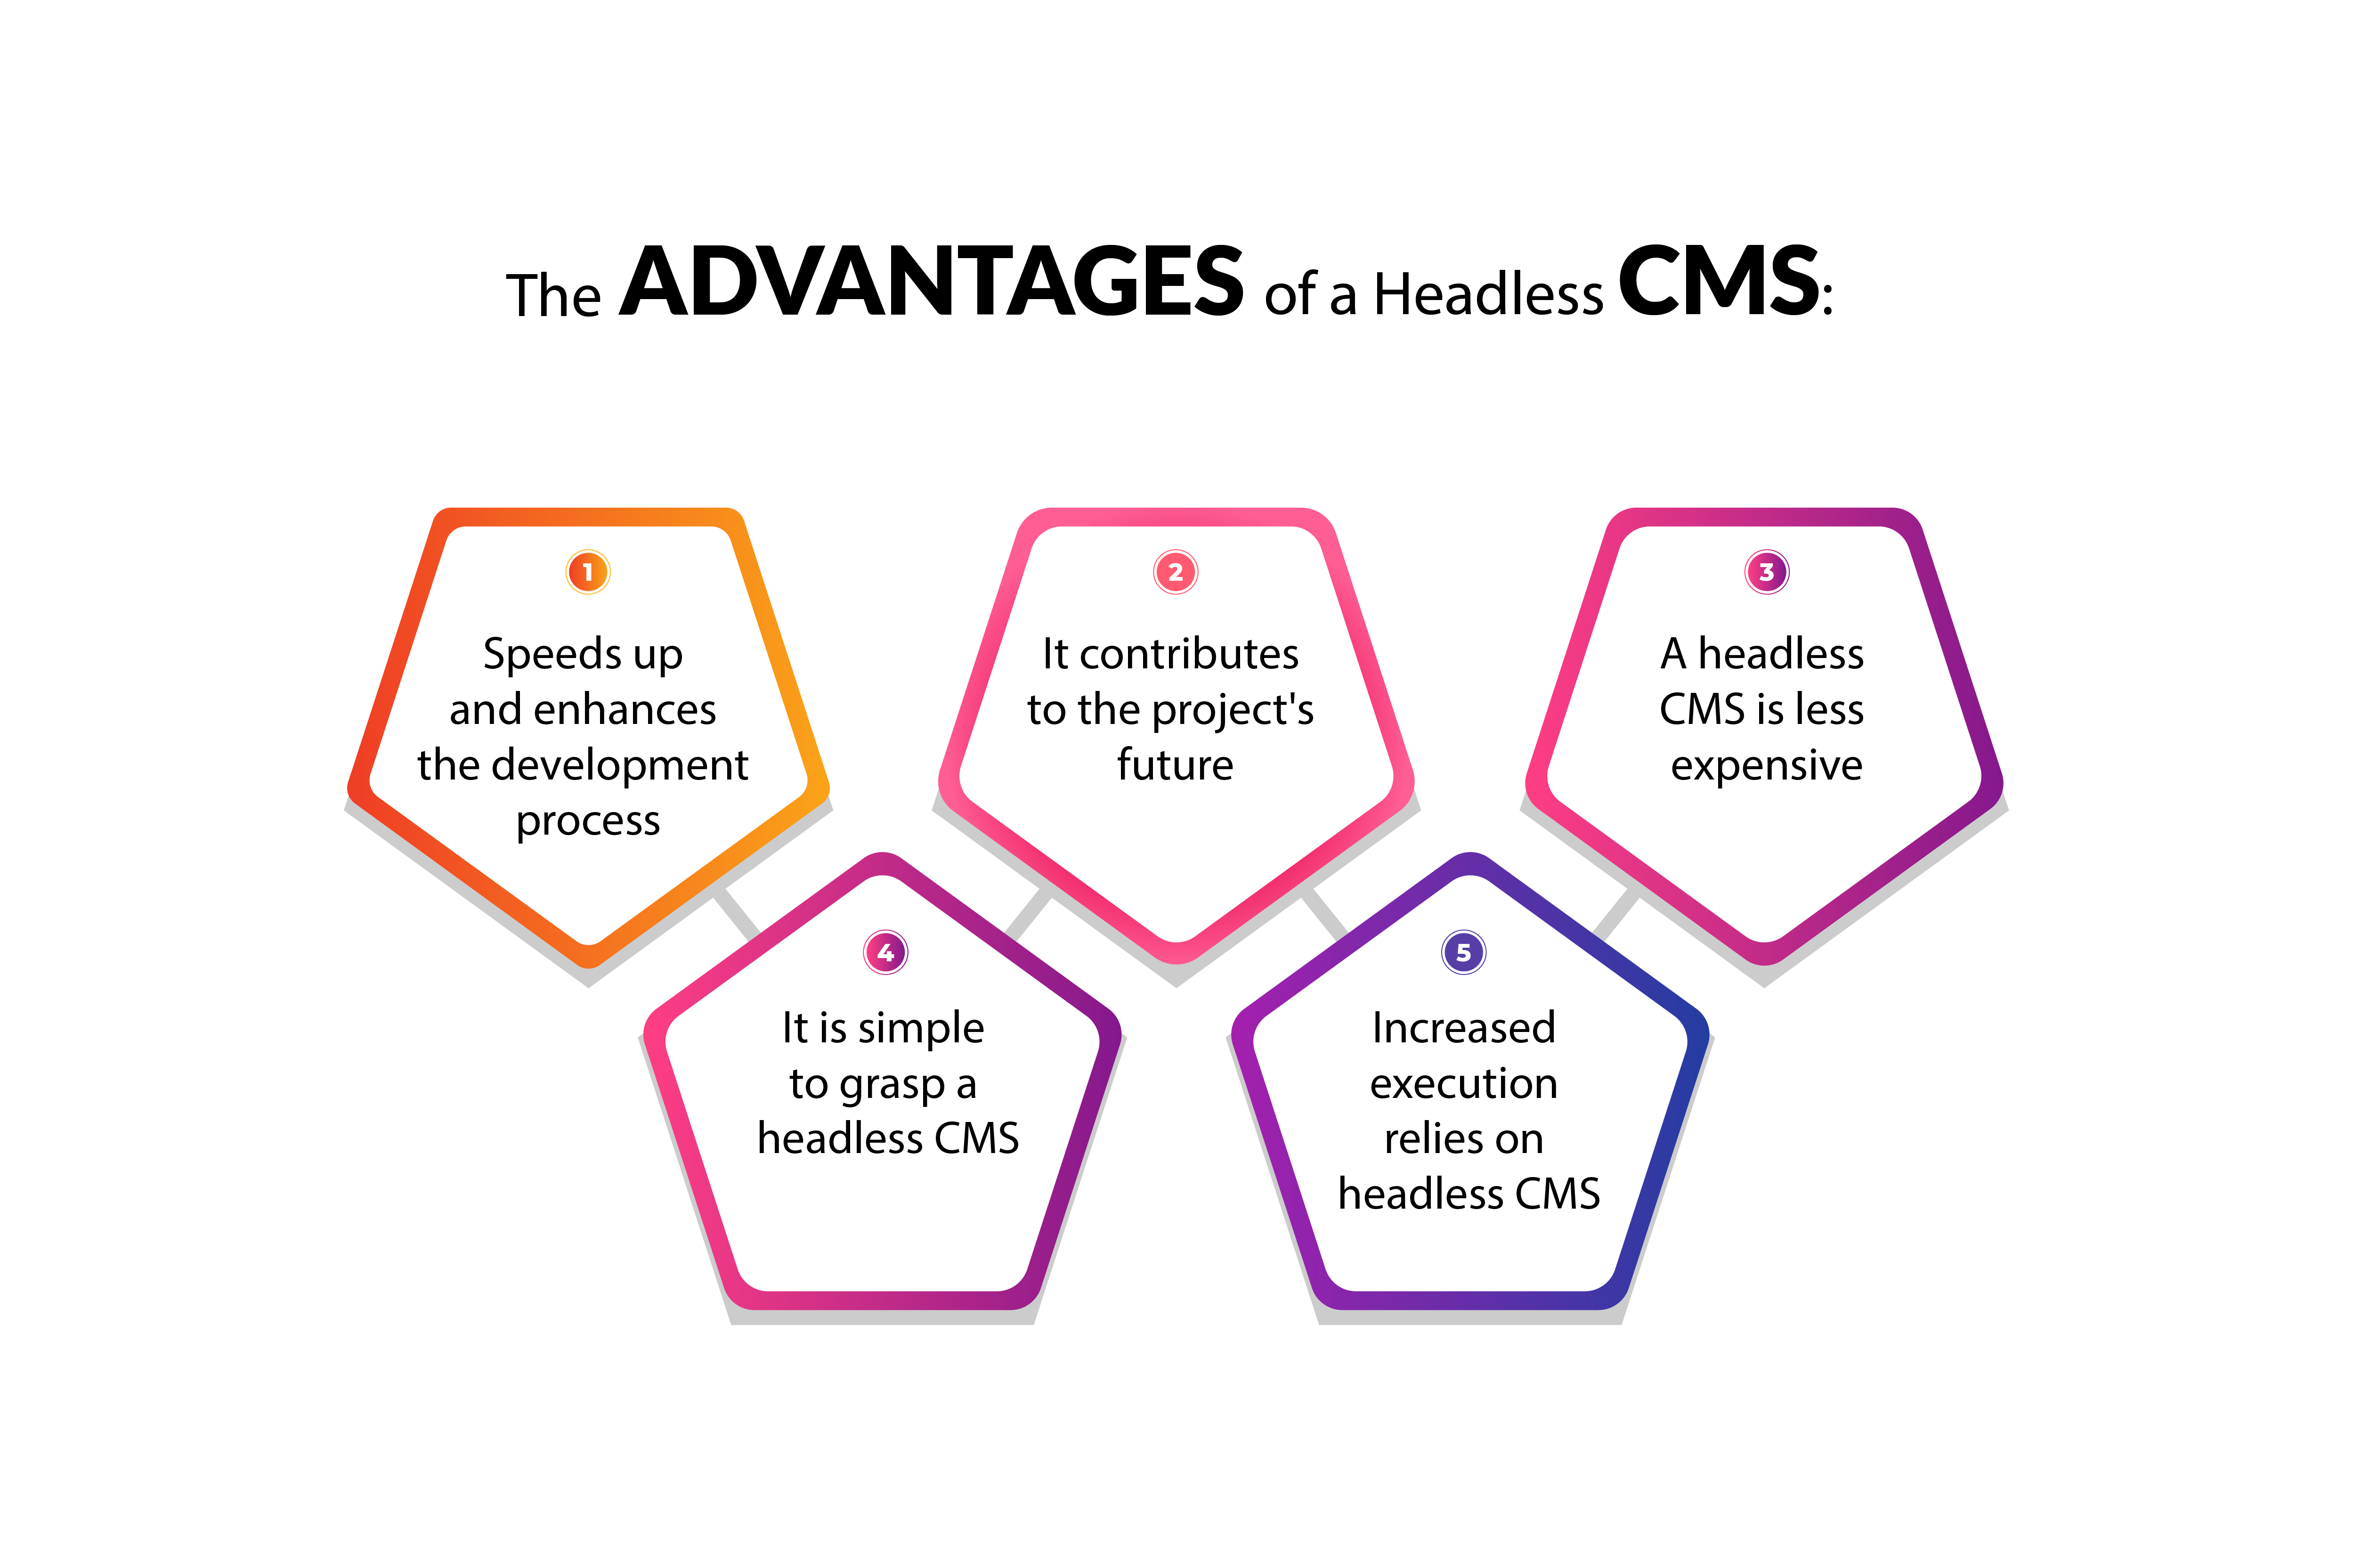 The advantages of a Headless CMS